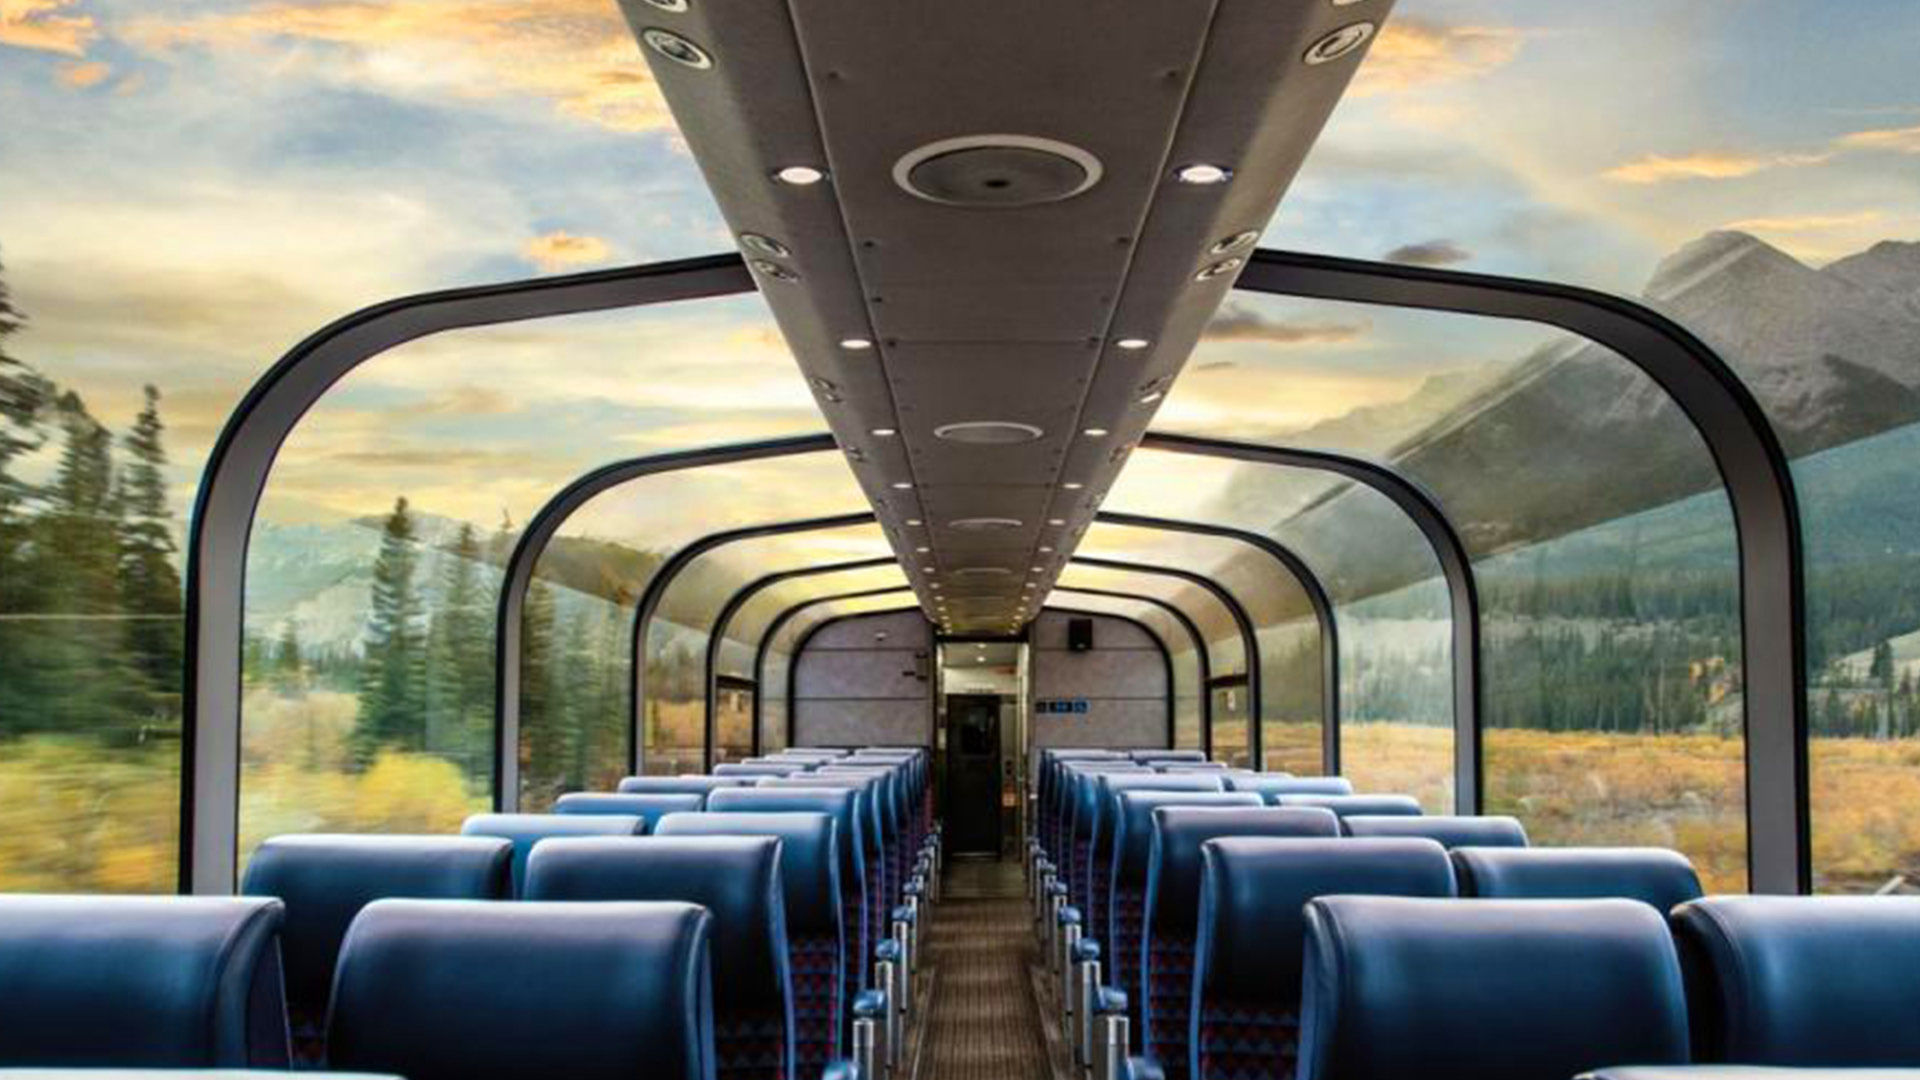 Take A Magical Ride Through The Canadian Rockies In Glass-Domed Train